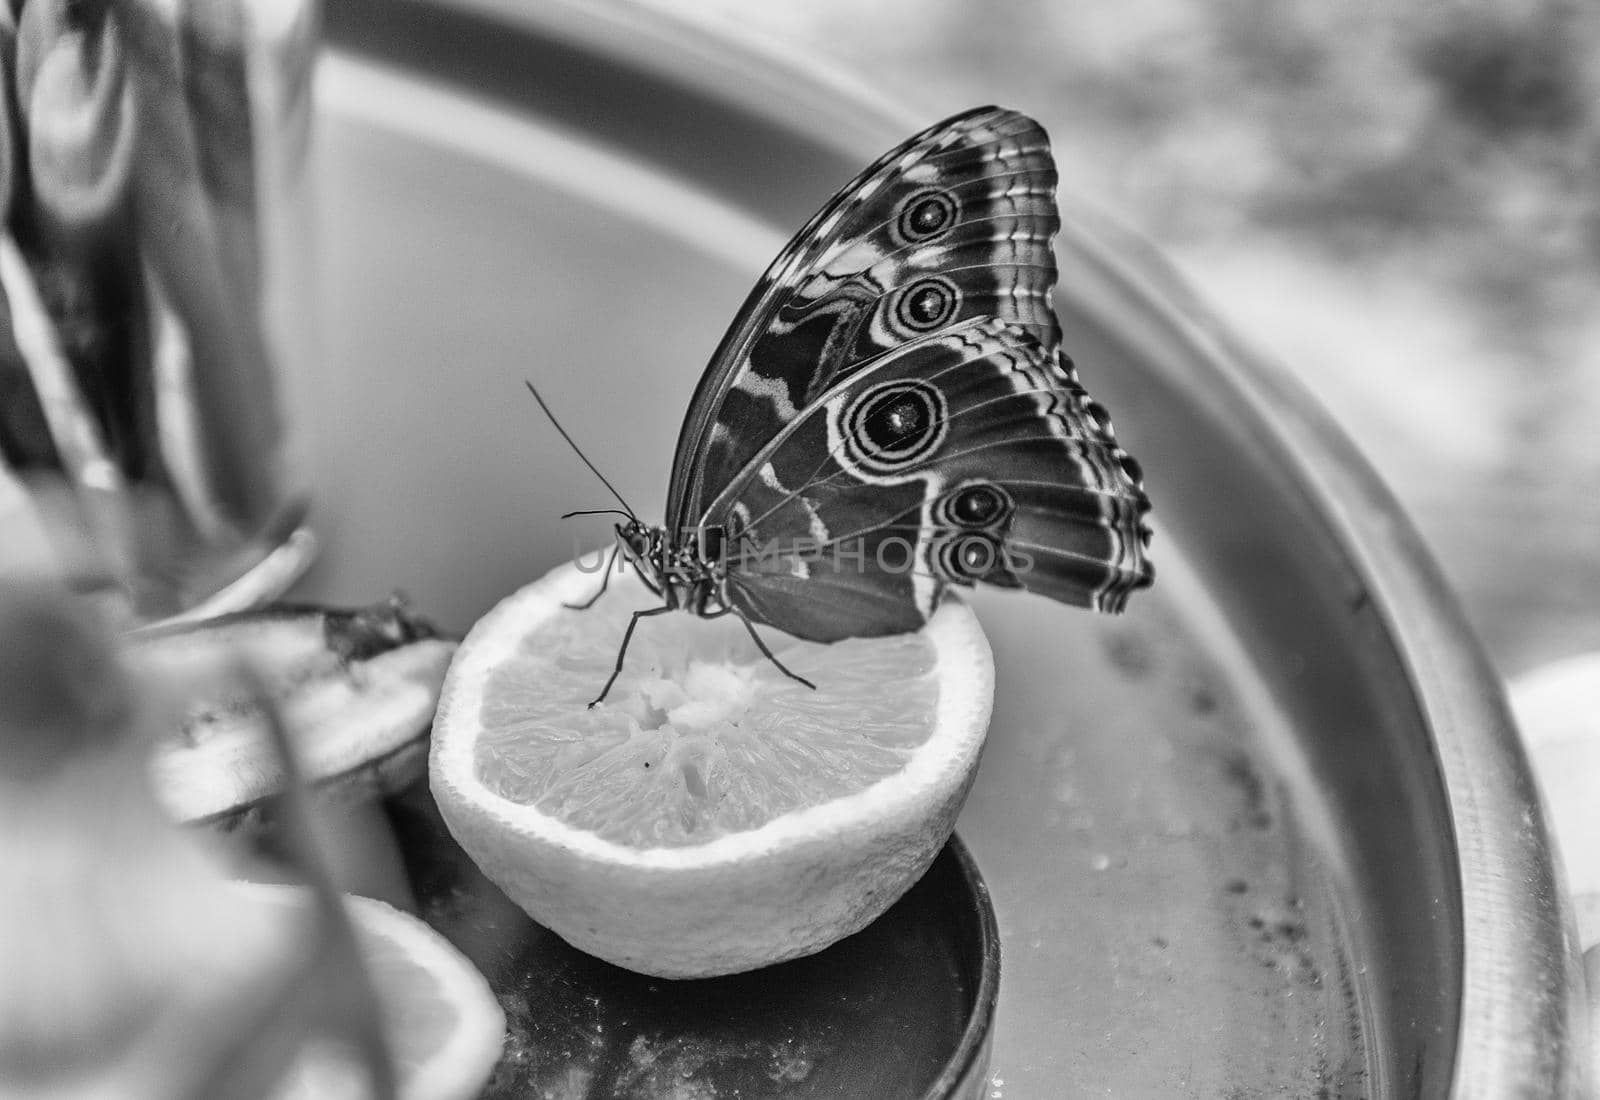 Morpho peleides,  tropical butterfly, eating from an orange by marcorubino